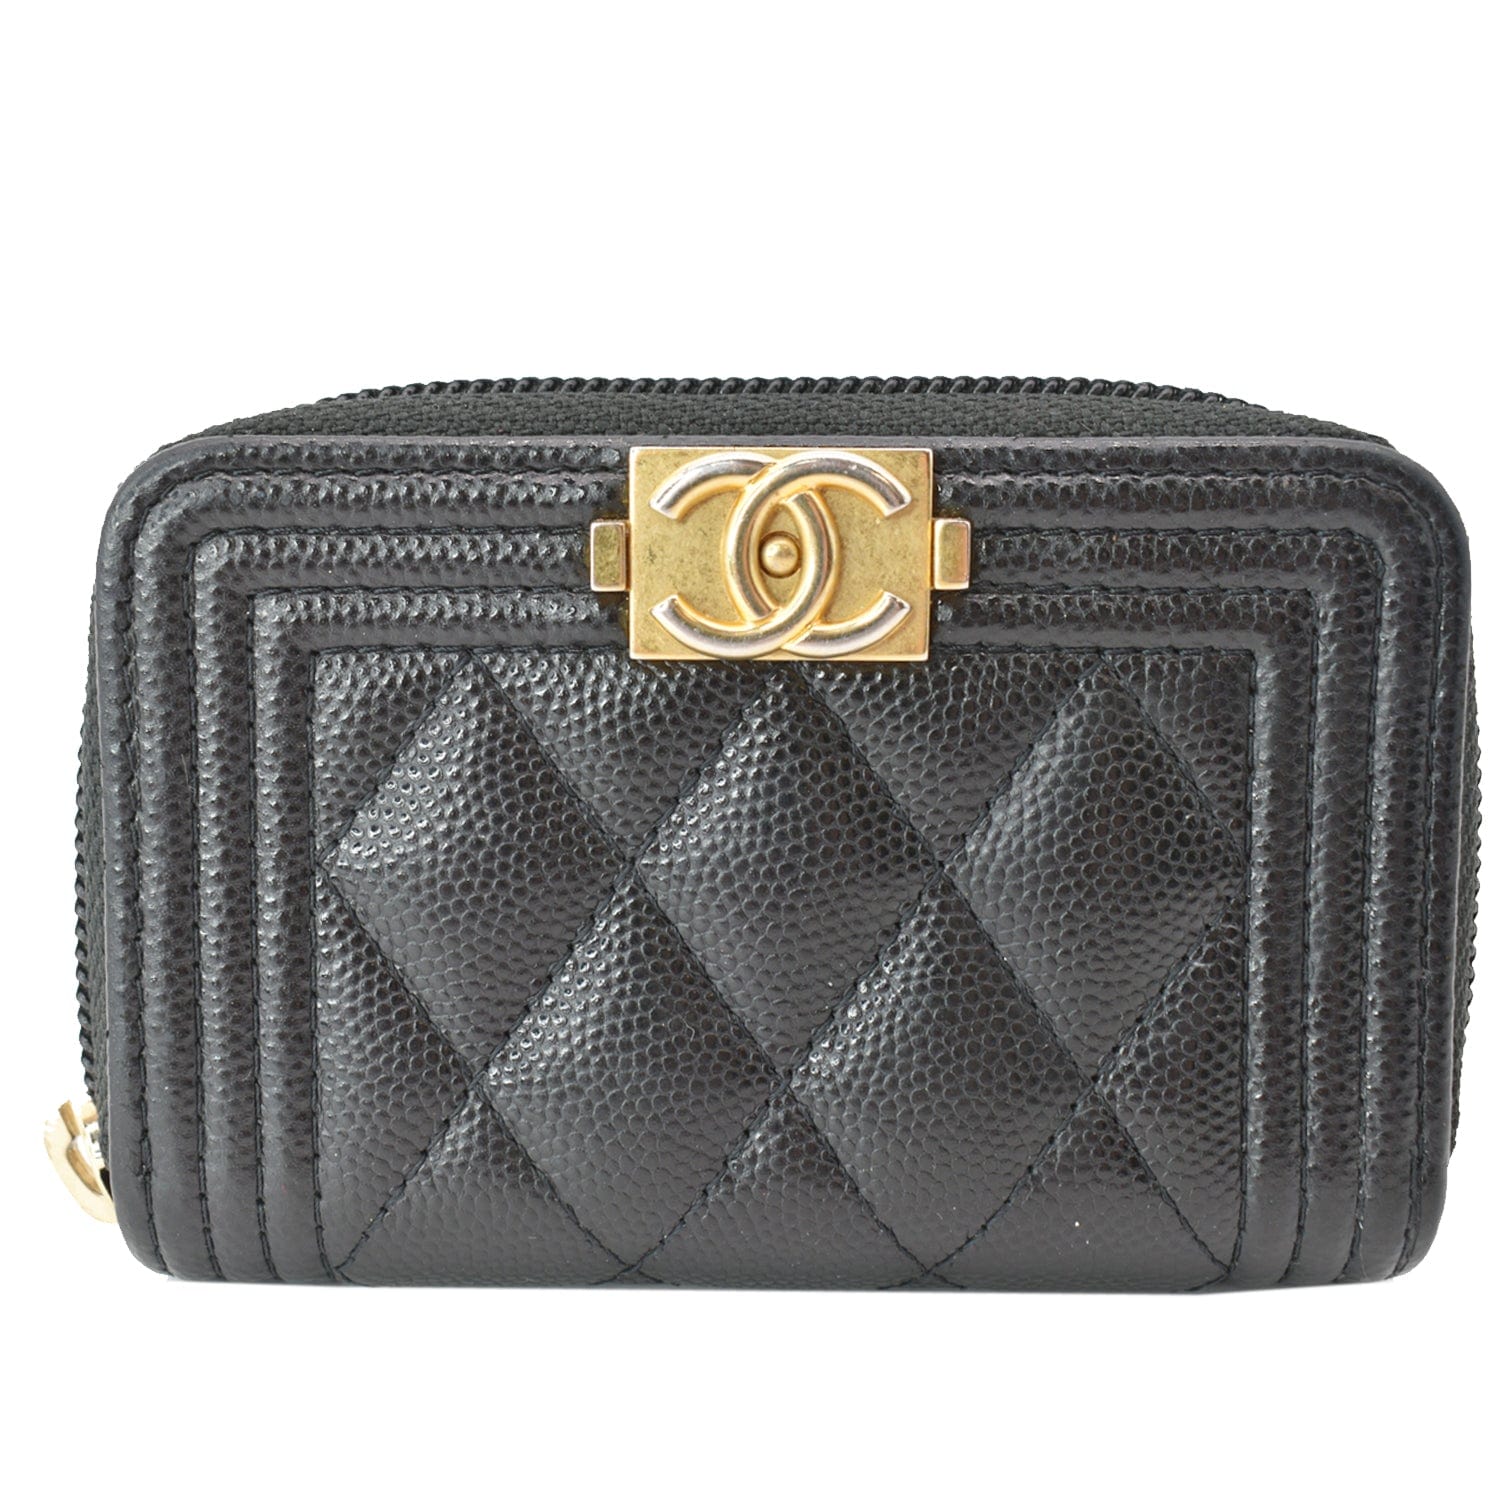 Chanel Pink Quilted Lambskin Leather Boy Zippy Compact Wallet